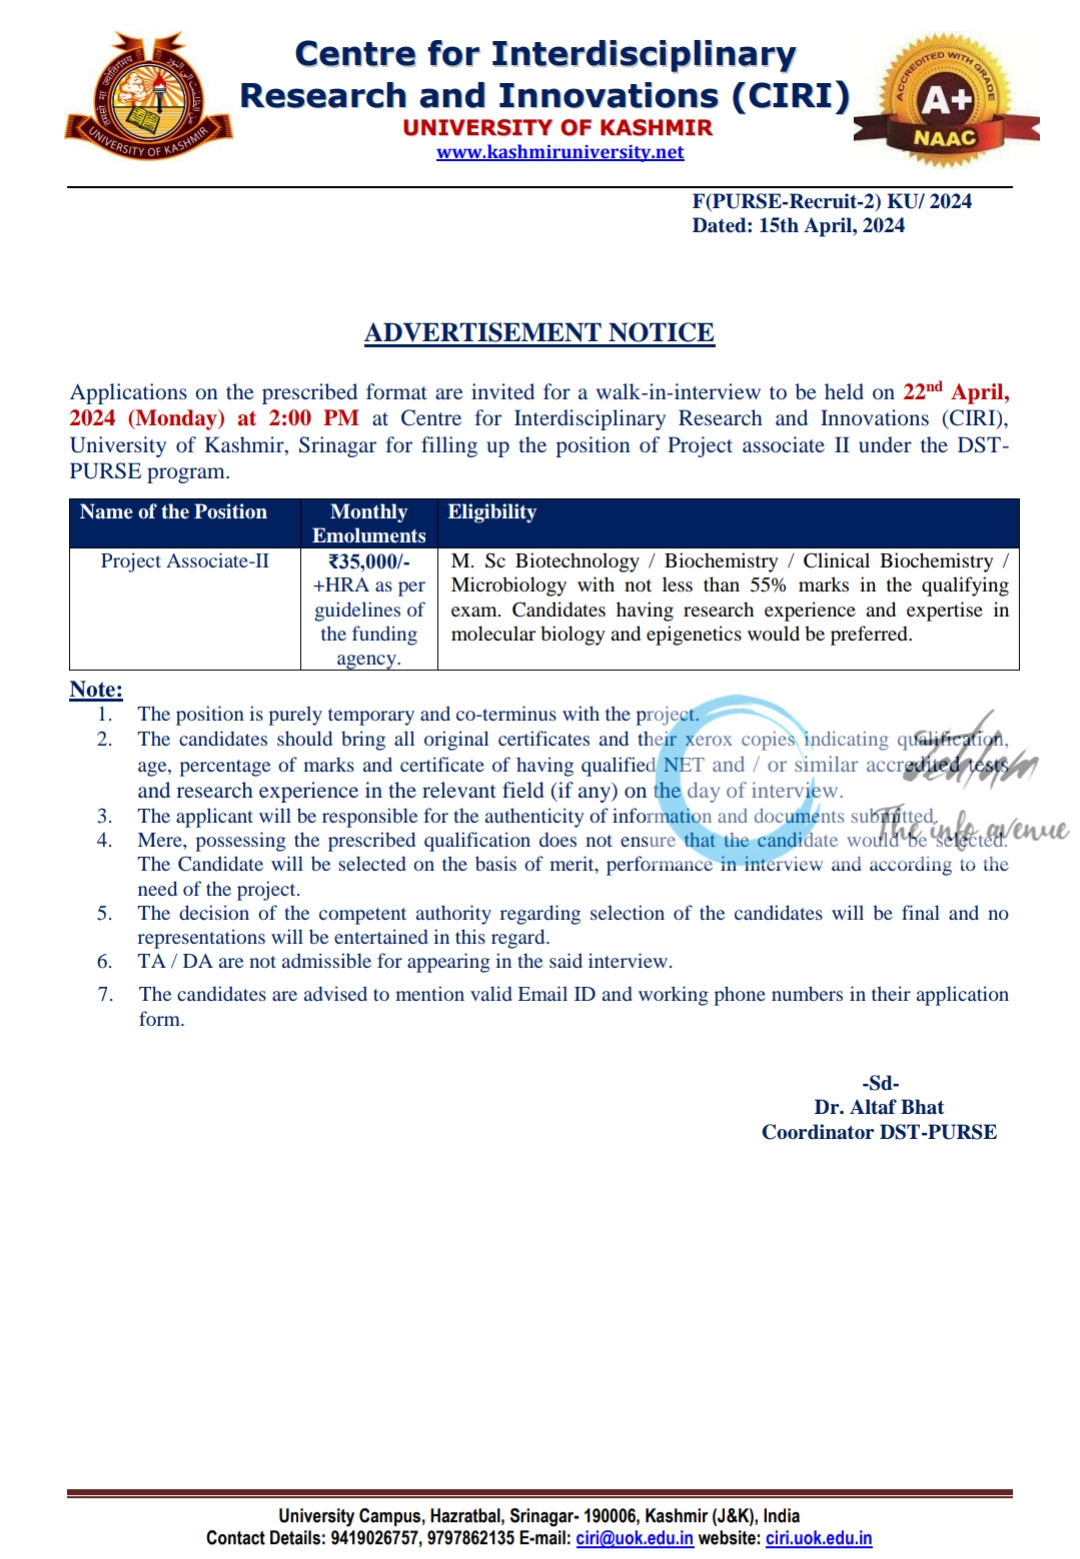 UNIVERSITY OF KASHMIR CENTRE FOR INTERDISCIPLINARY RESEARCH AND INNOVATIONS CIRI ADVERTISEMENT NOTICE 2024